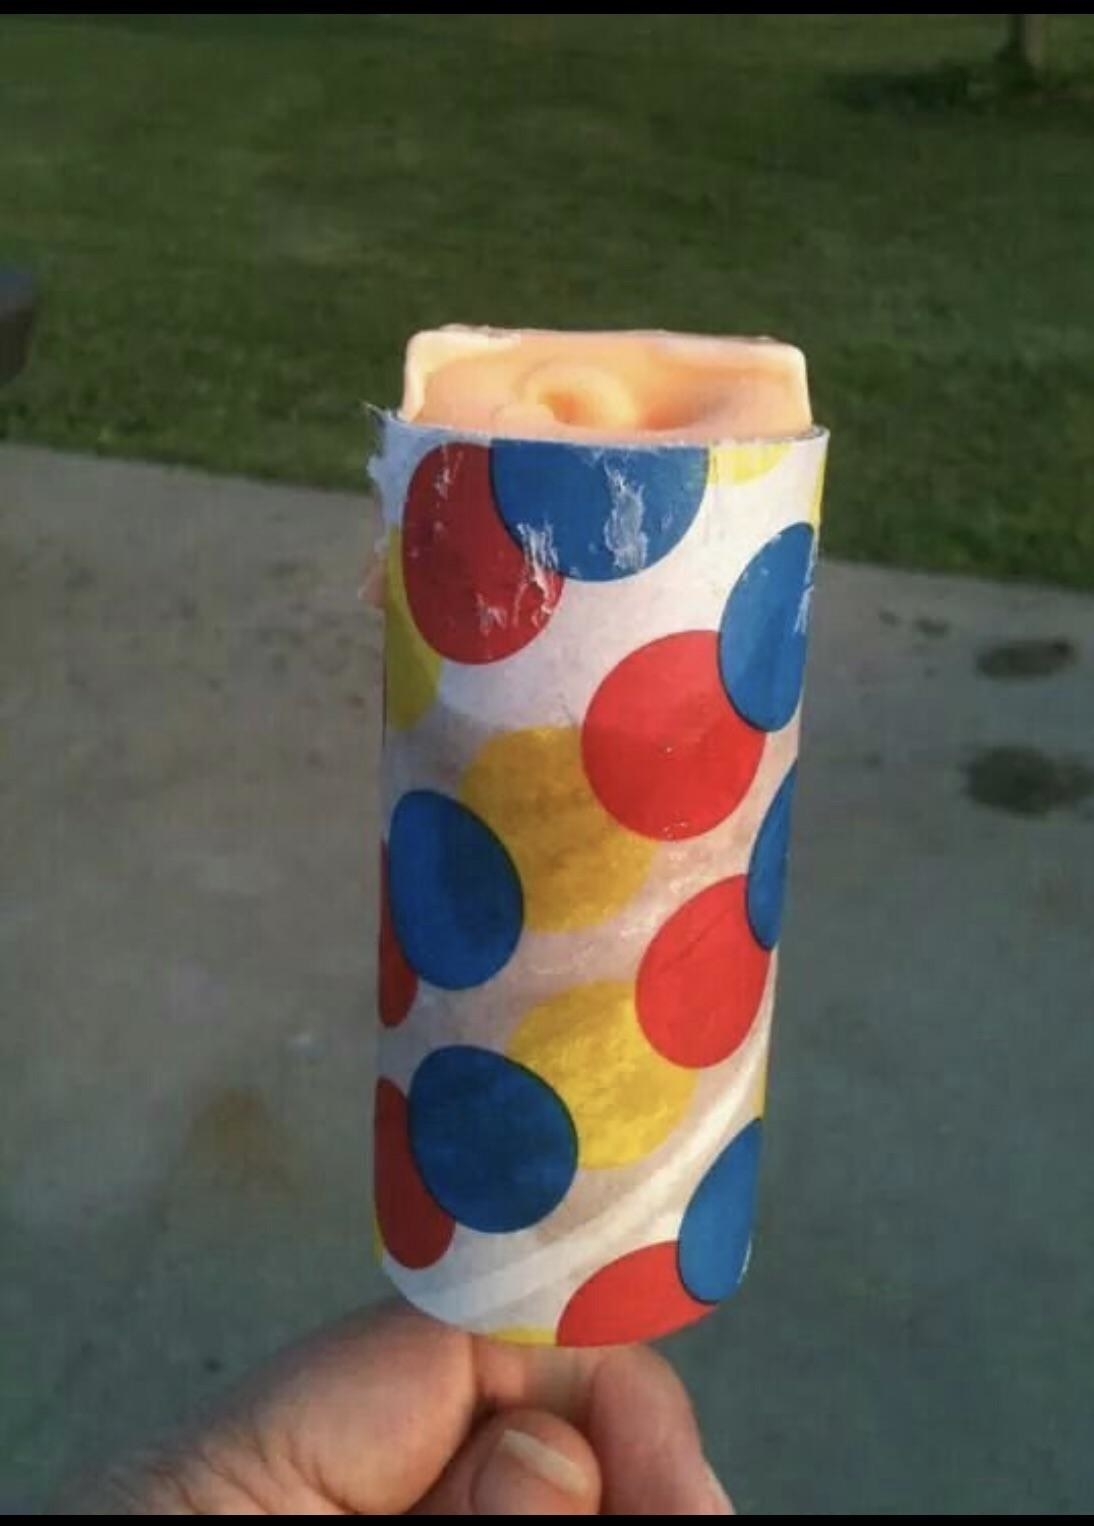 A hand grips a push popsicle that has a wrapper with primary colors on it